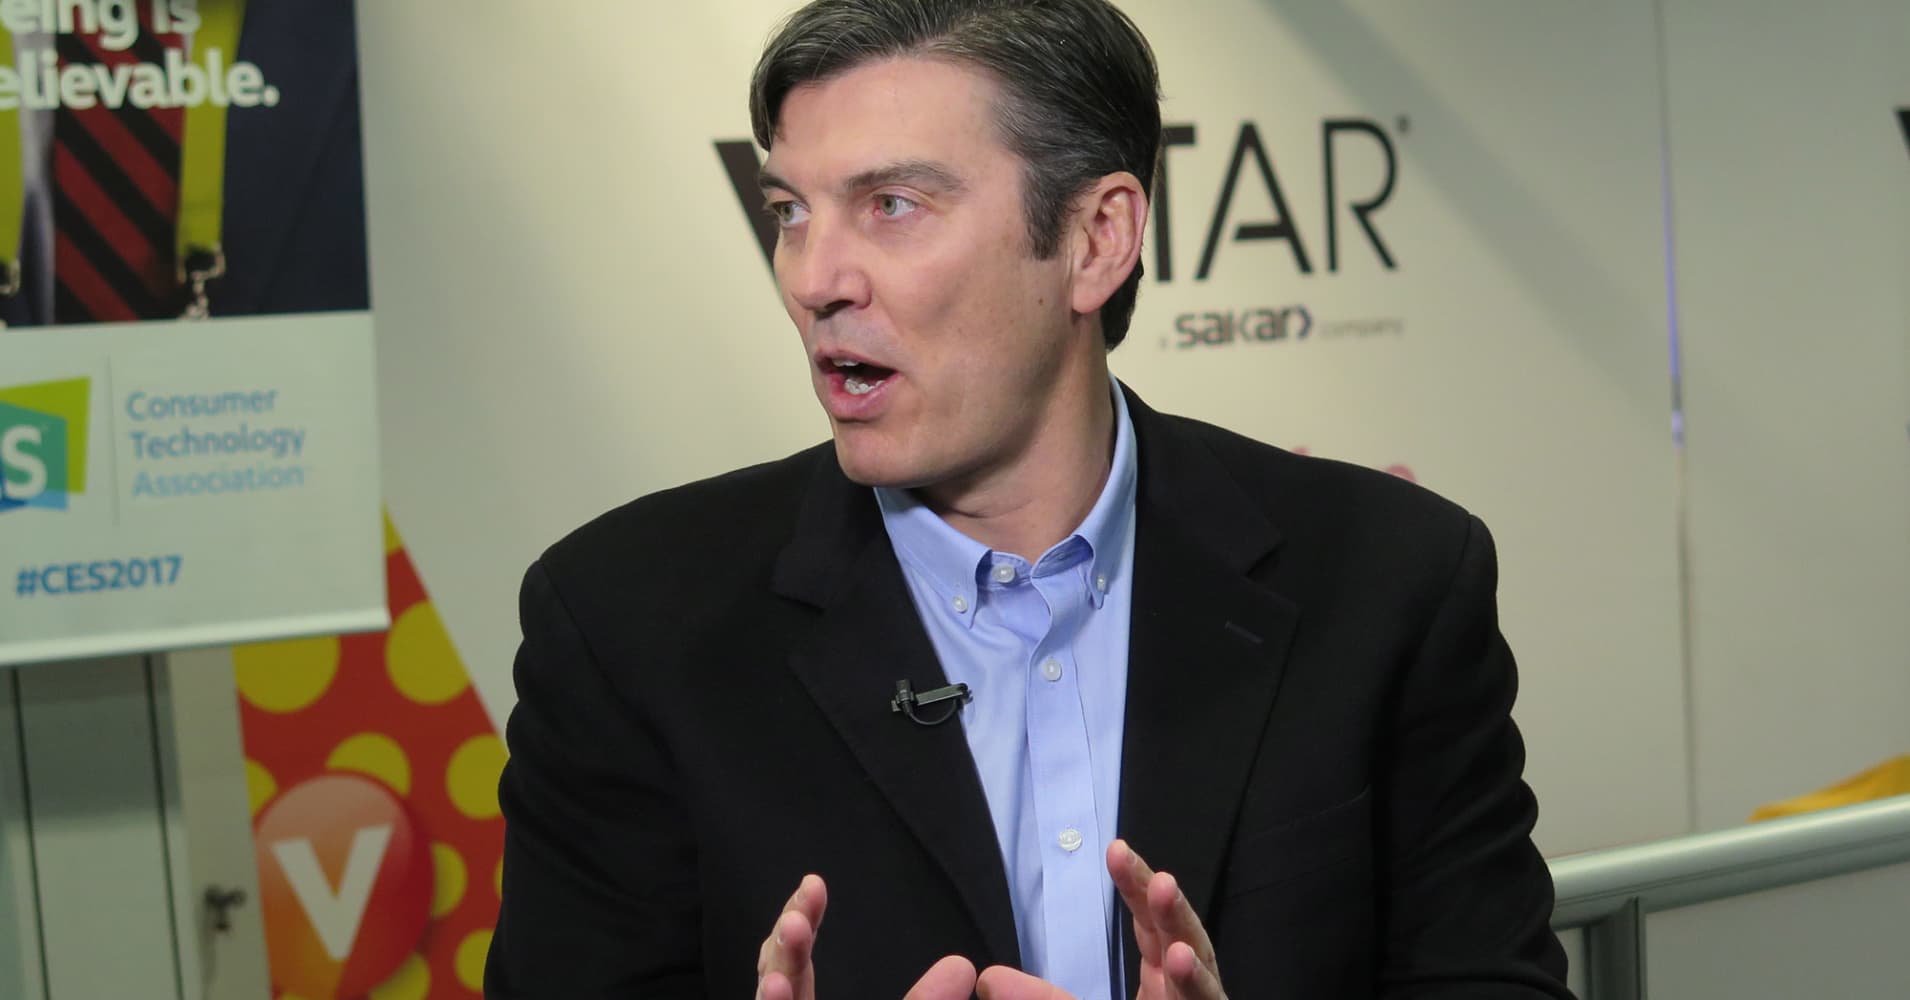 AOL chief Tim Armstrong says he's hopeful Verizon-Yahoo deal will close despite discount rumors - CNBC